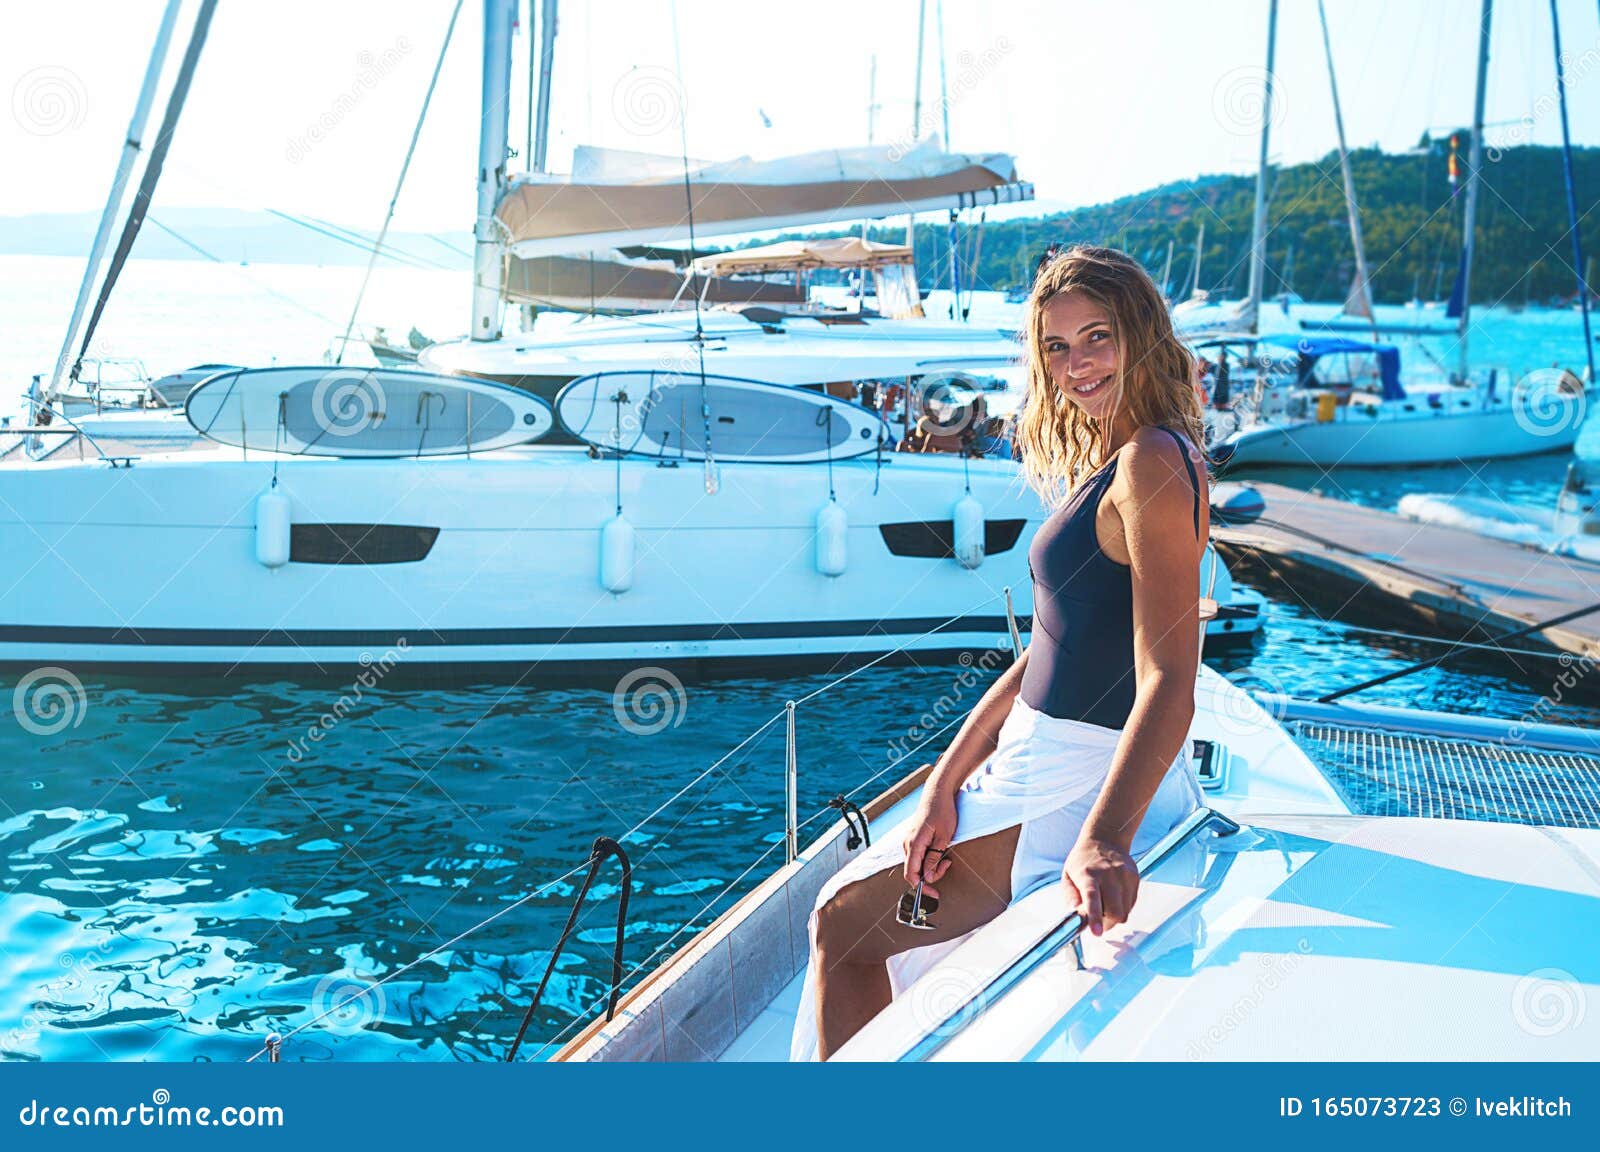 woman on yacht pictures